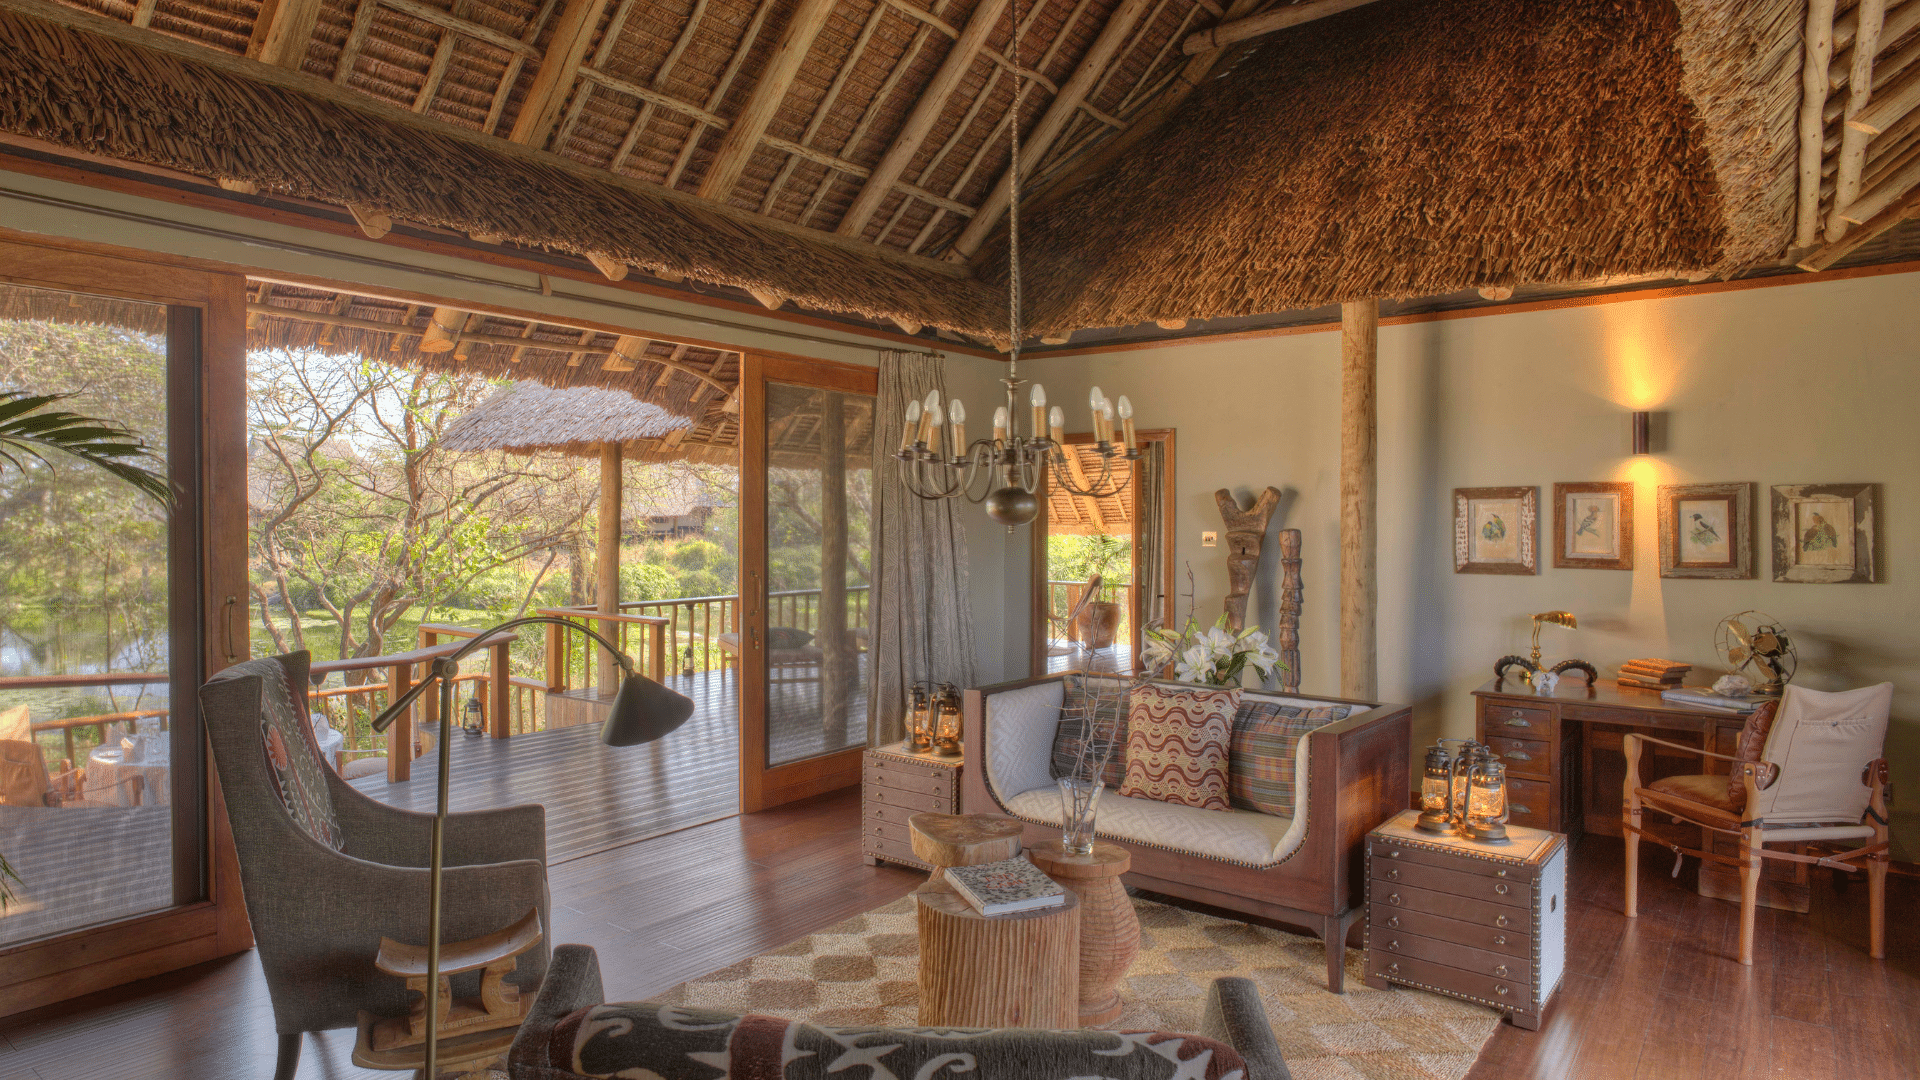 Our Safari Home Away from Home